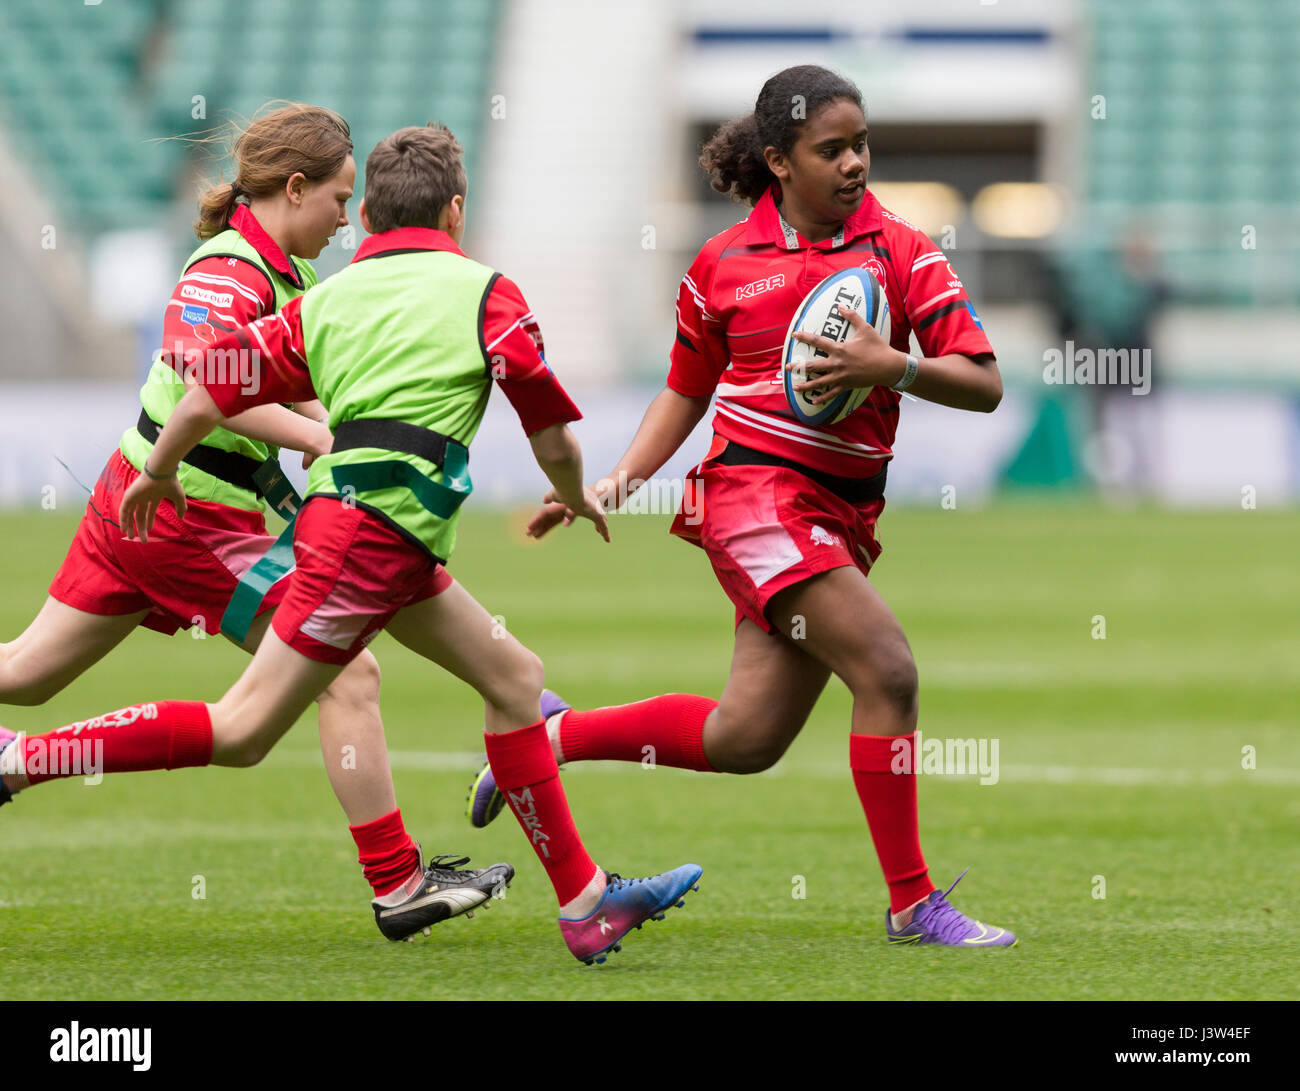 A girl runs with the ball in a mixed game of tag rugby for children involving girls and boys Stock Photo